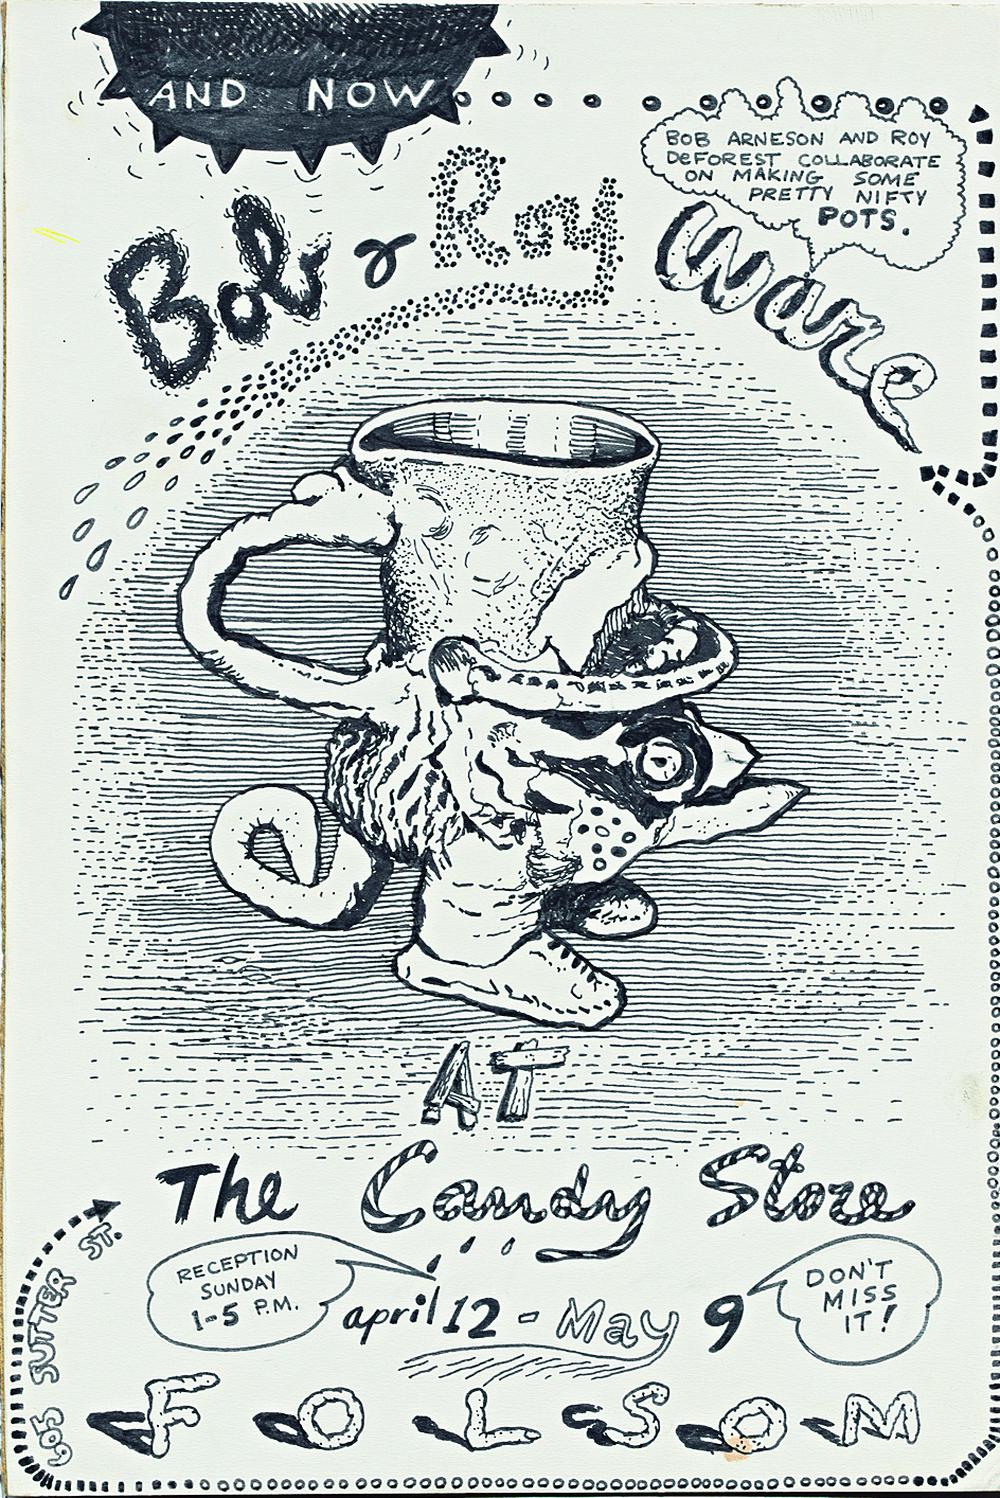 Poster listing the exhibit with a surrealist frog and coffee cup hybrid as the central image